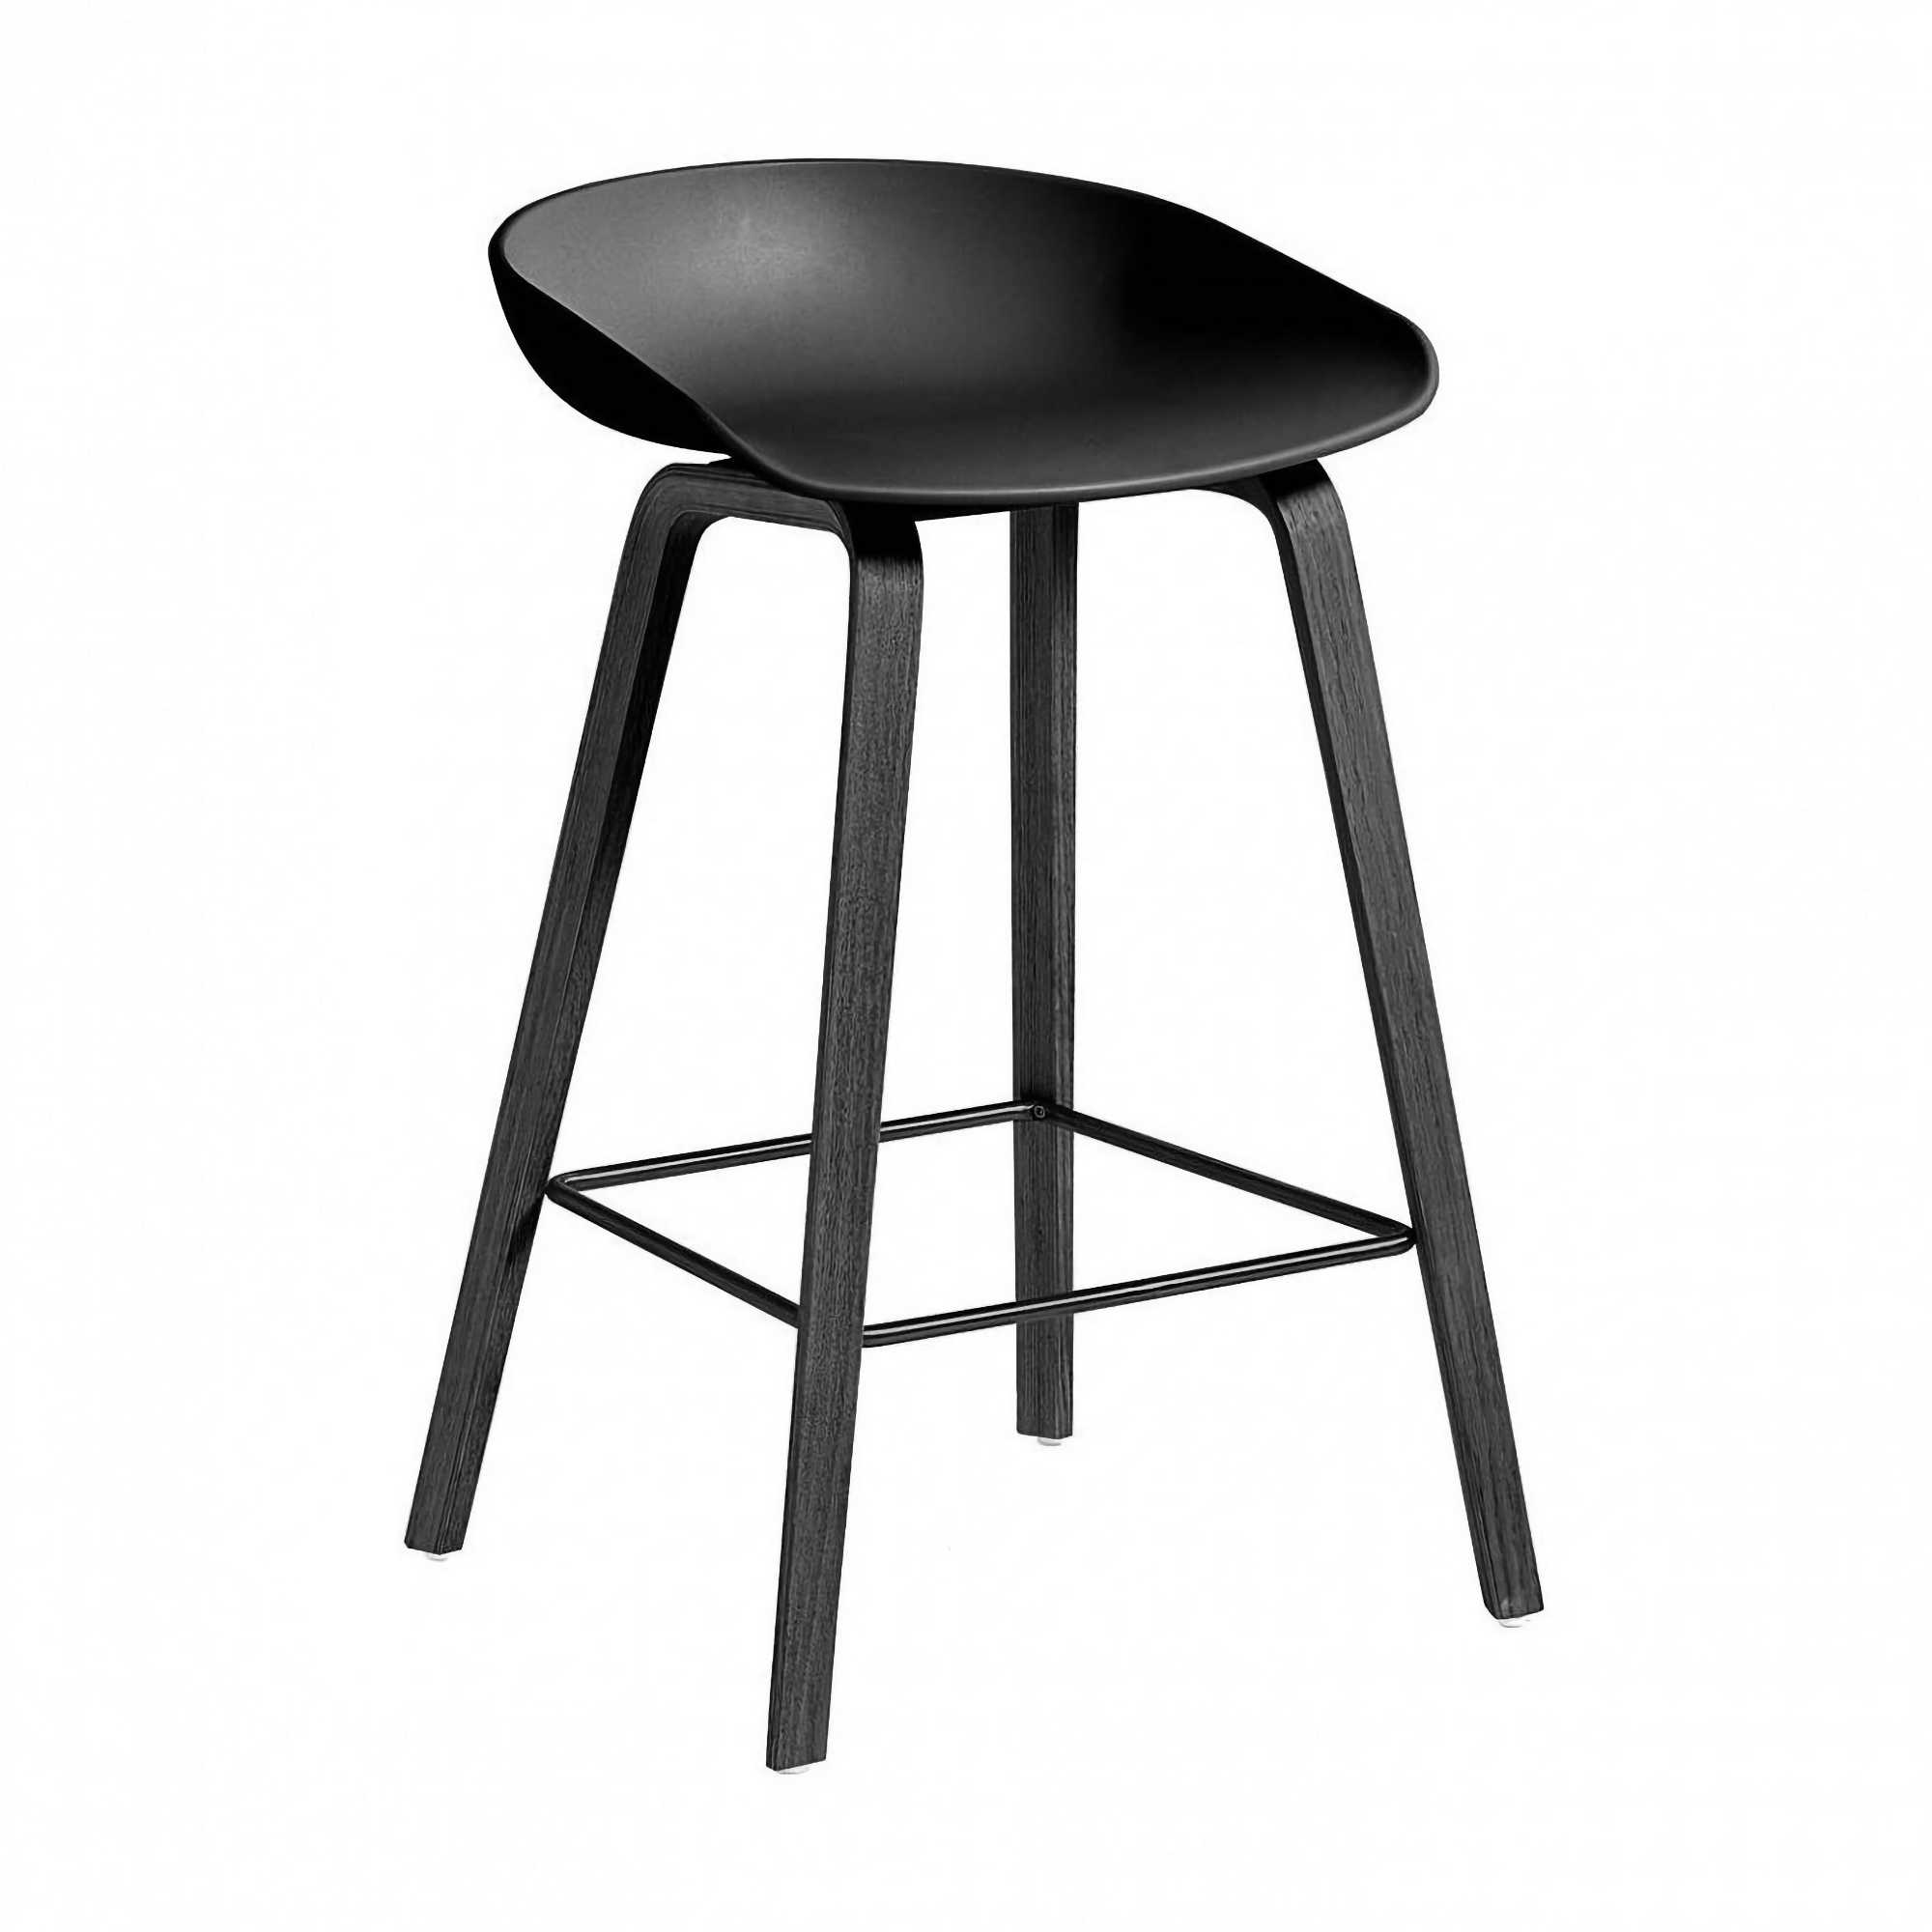 HAY AAS32 counter stool (65 cm), black/black stained oak